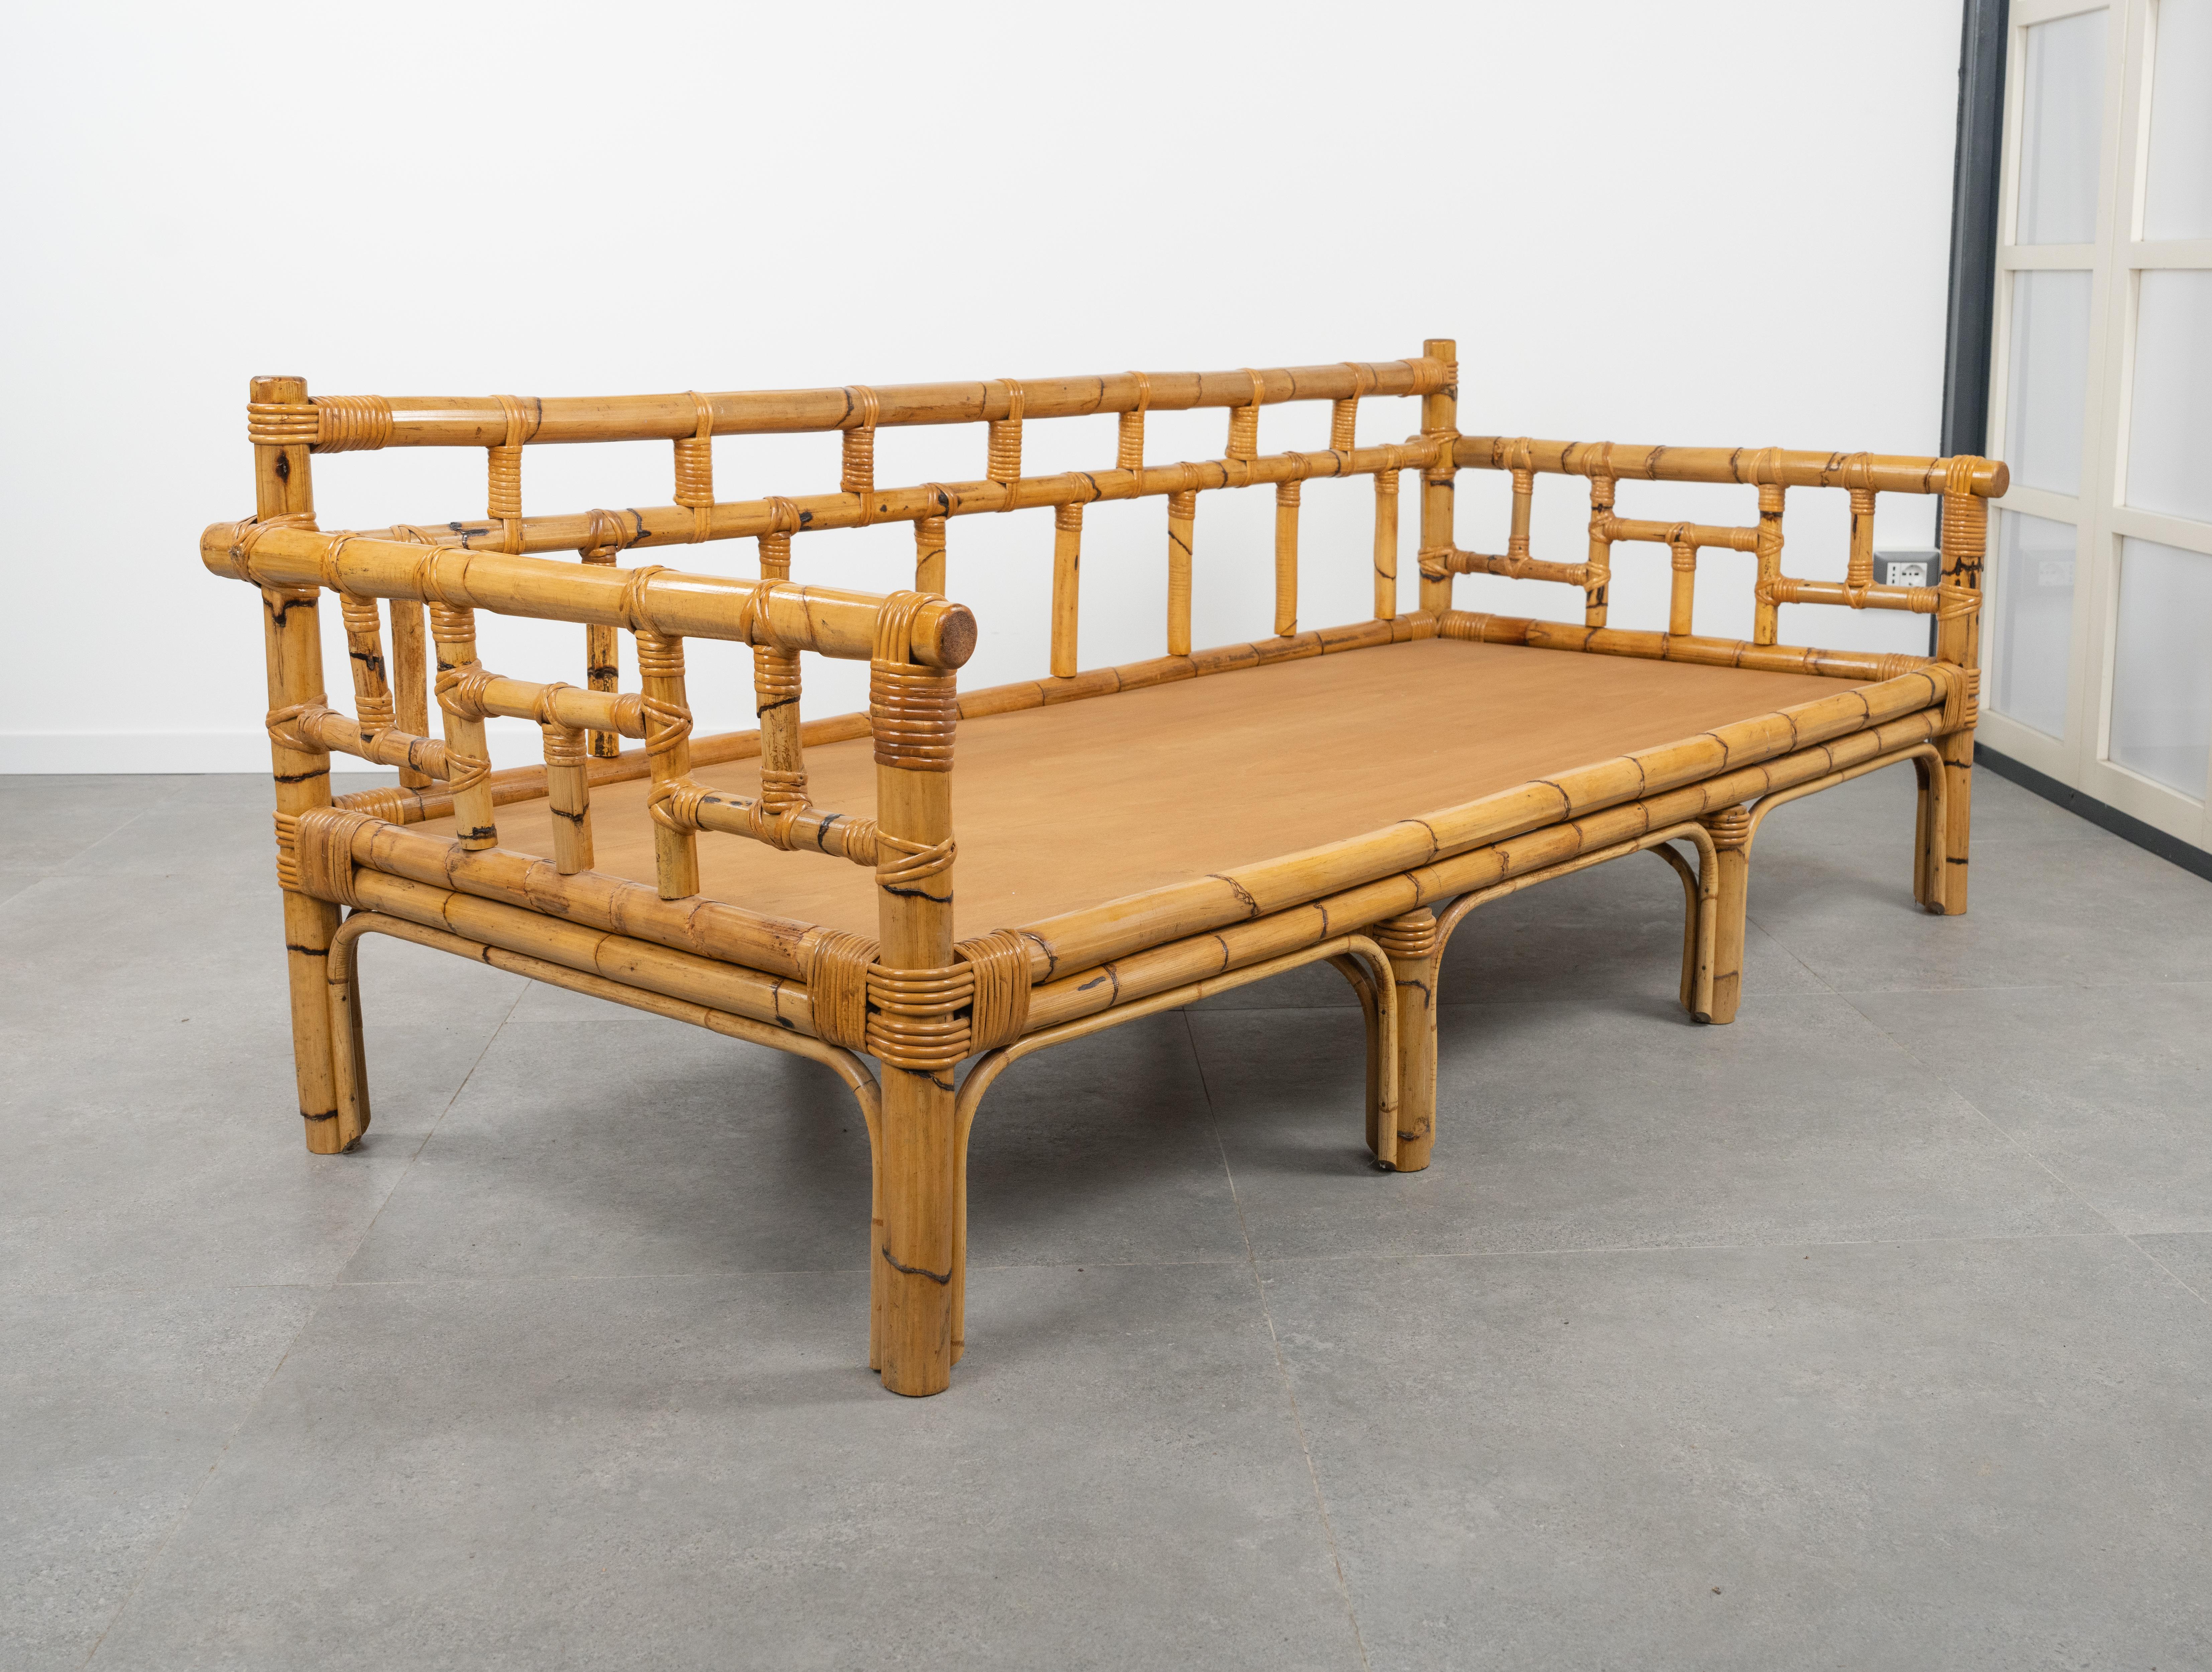 Midcentury Bamboo and Rattan Three-Seat Sofa by Vivai Del Sud, Italy 1970s For Sale 5